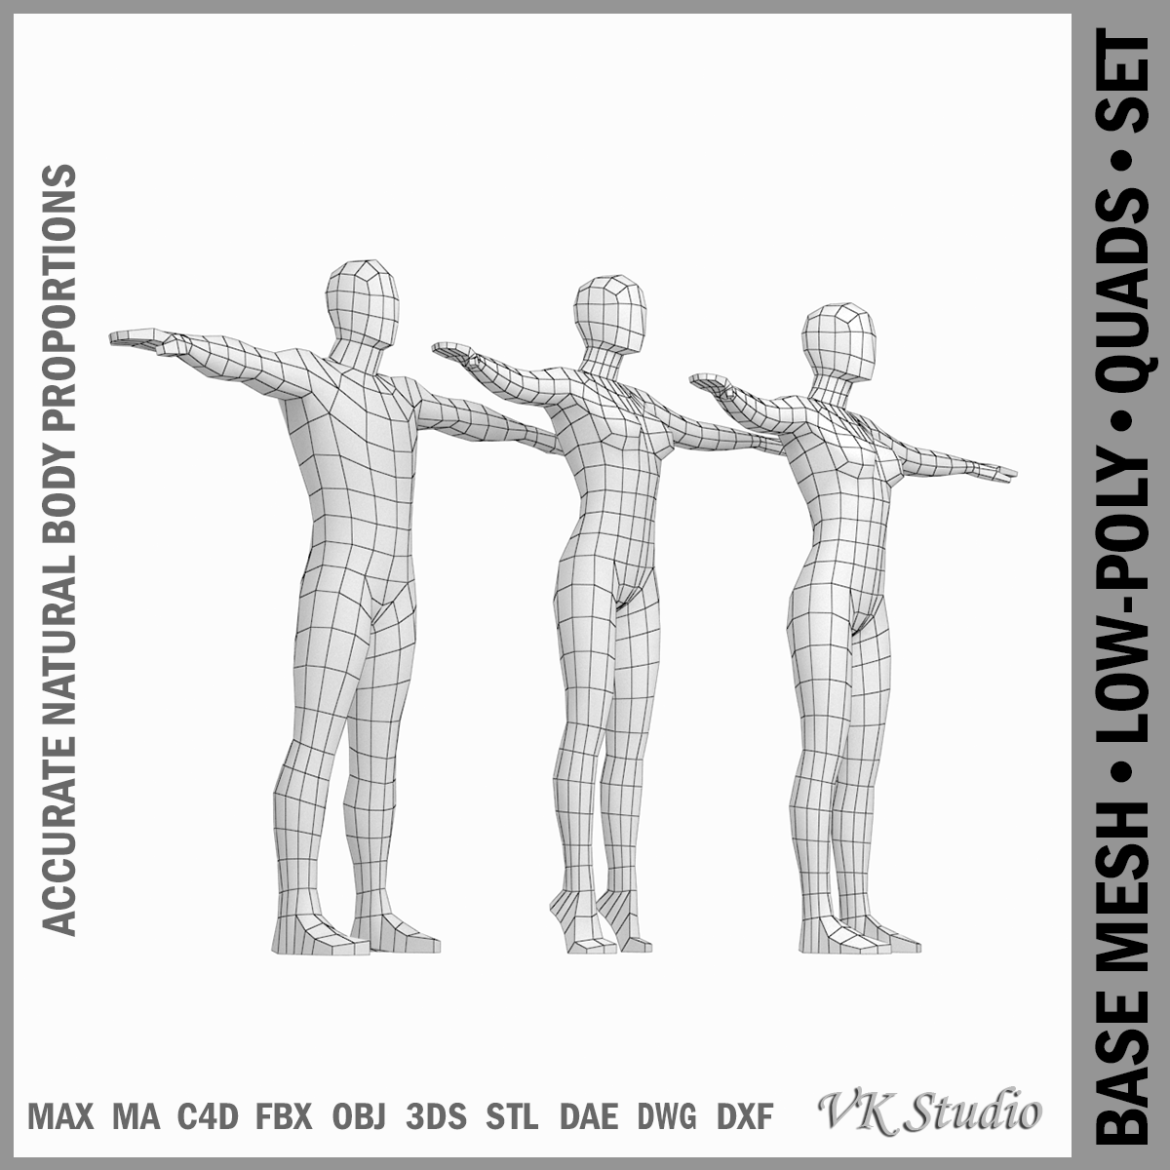  <a class="continue" href="https://www.flatpyramid.com/3d-models/characters-3d-models/characters-collections/female-and-male-base-mesh-in-t-pose/">Continue Reading<span> Female and Male Base Mesh in T-Pose</span></a>